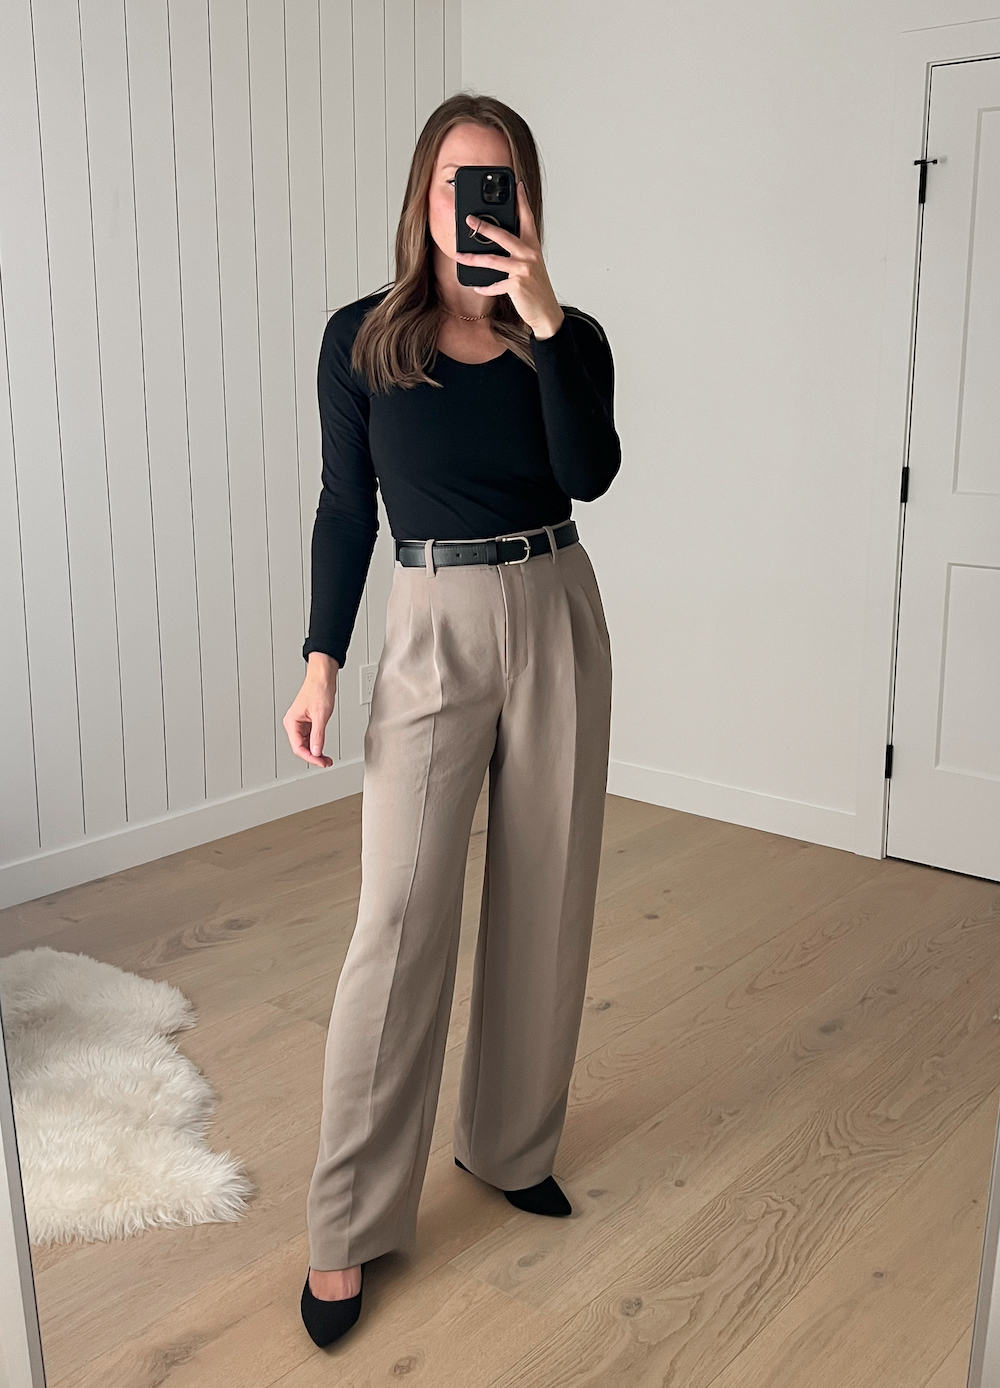 Christal wearing the Aritzia Effortless Pants in Nomad Taupe with a black long-sleeved top and a black belt with black pumps